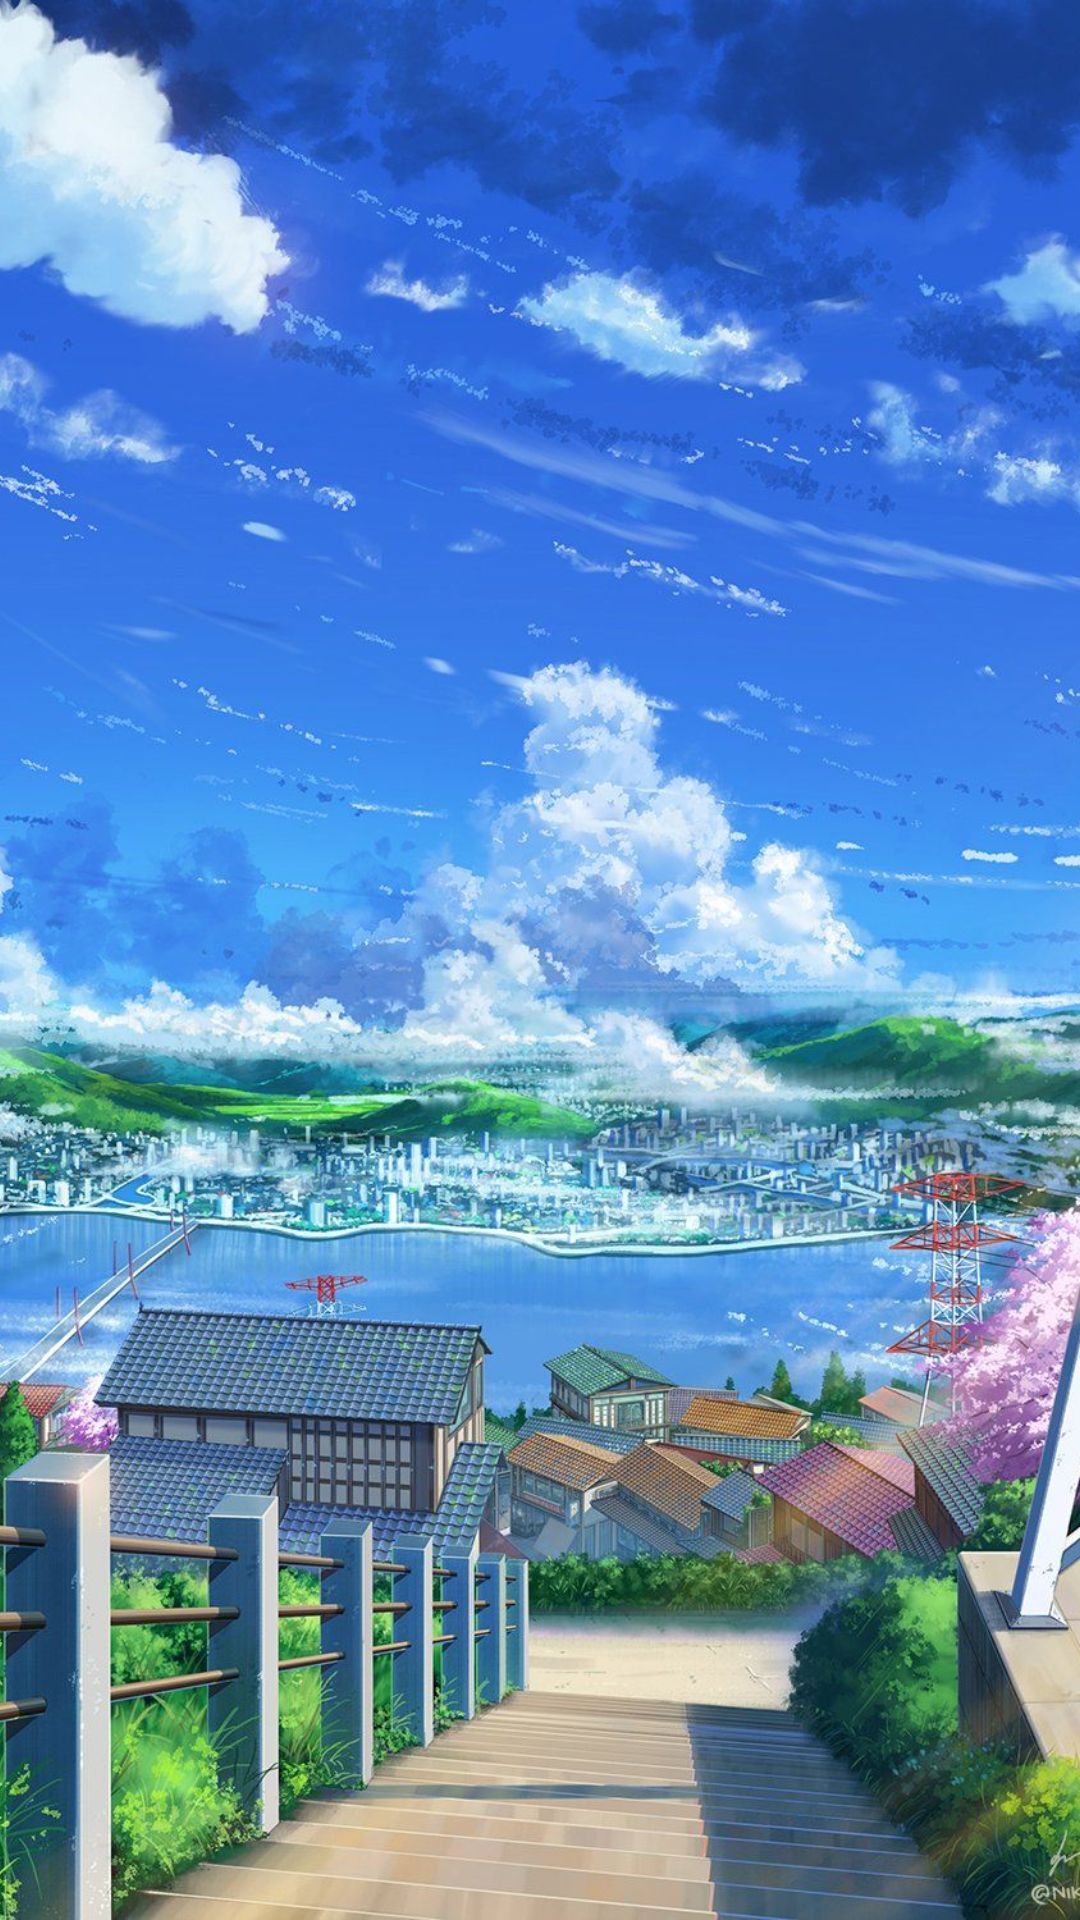 A painting of an asian city with mountains in the background - Anime landscape